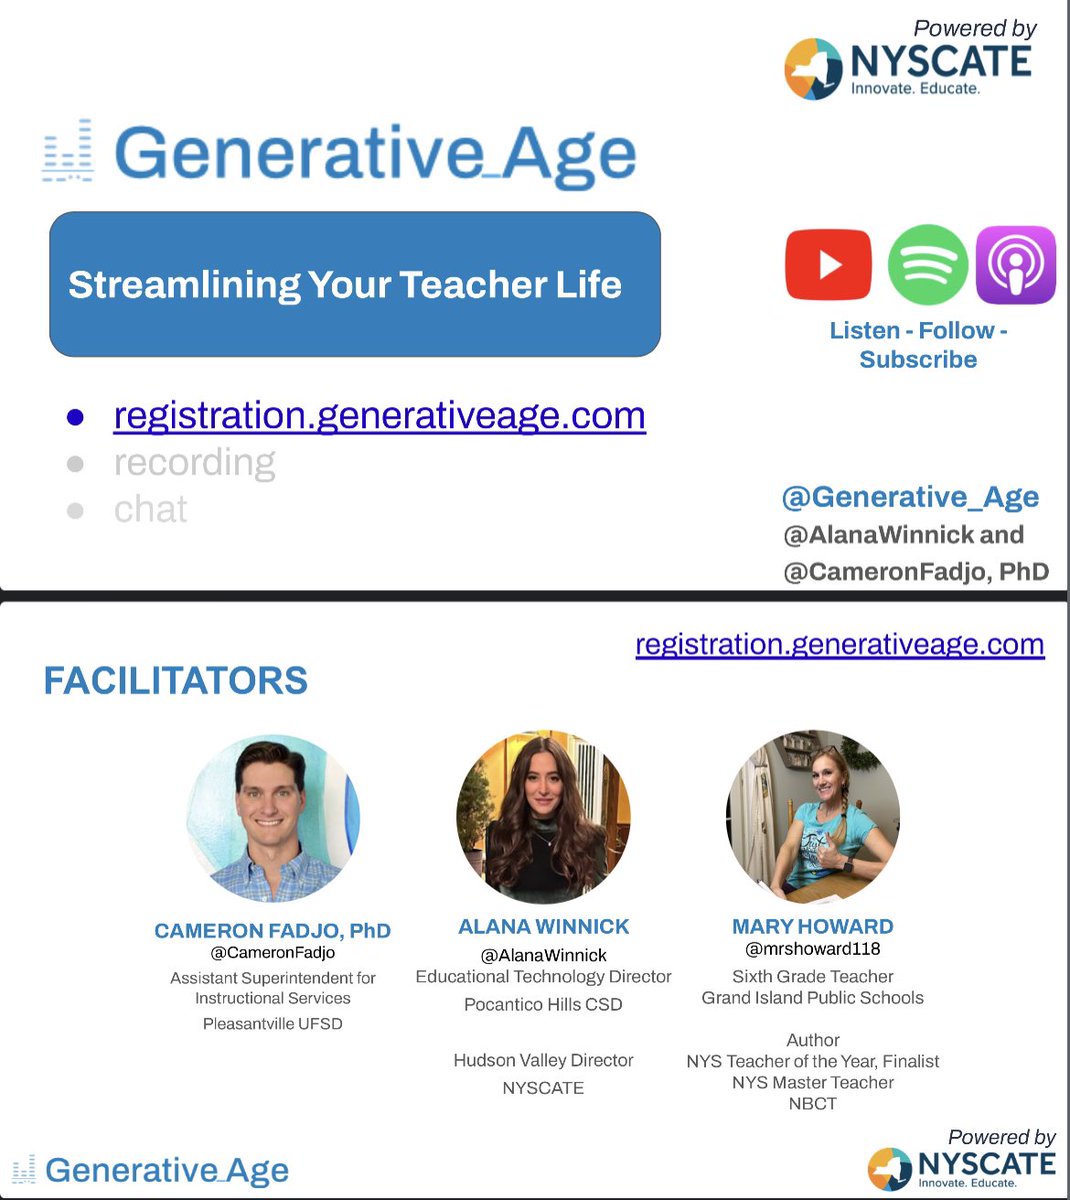 Have you signed up for our next FREE @generative_age session on #generativeAI & #ChatGPT on May 15th @ 7pm with @mrshoward118 ?! If not, make sure you do! nyscate.configio.com/pd/1253?code=Z… @CameronFadjo @NYSCATE #pbl #ai #AIedu #AIinEDU #edtech #edtechchat #edchat